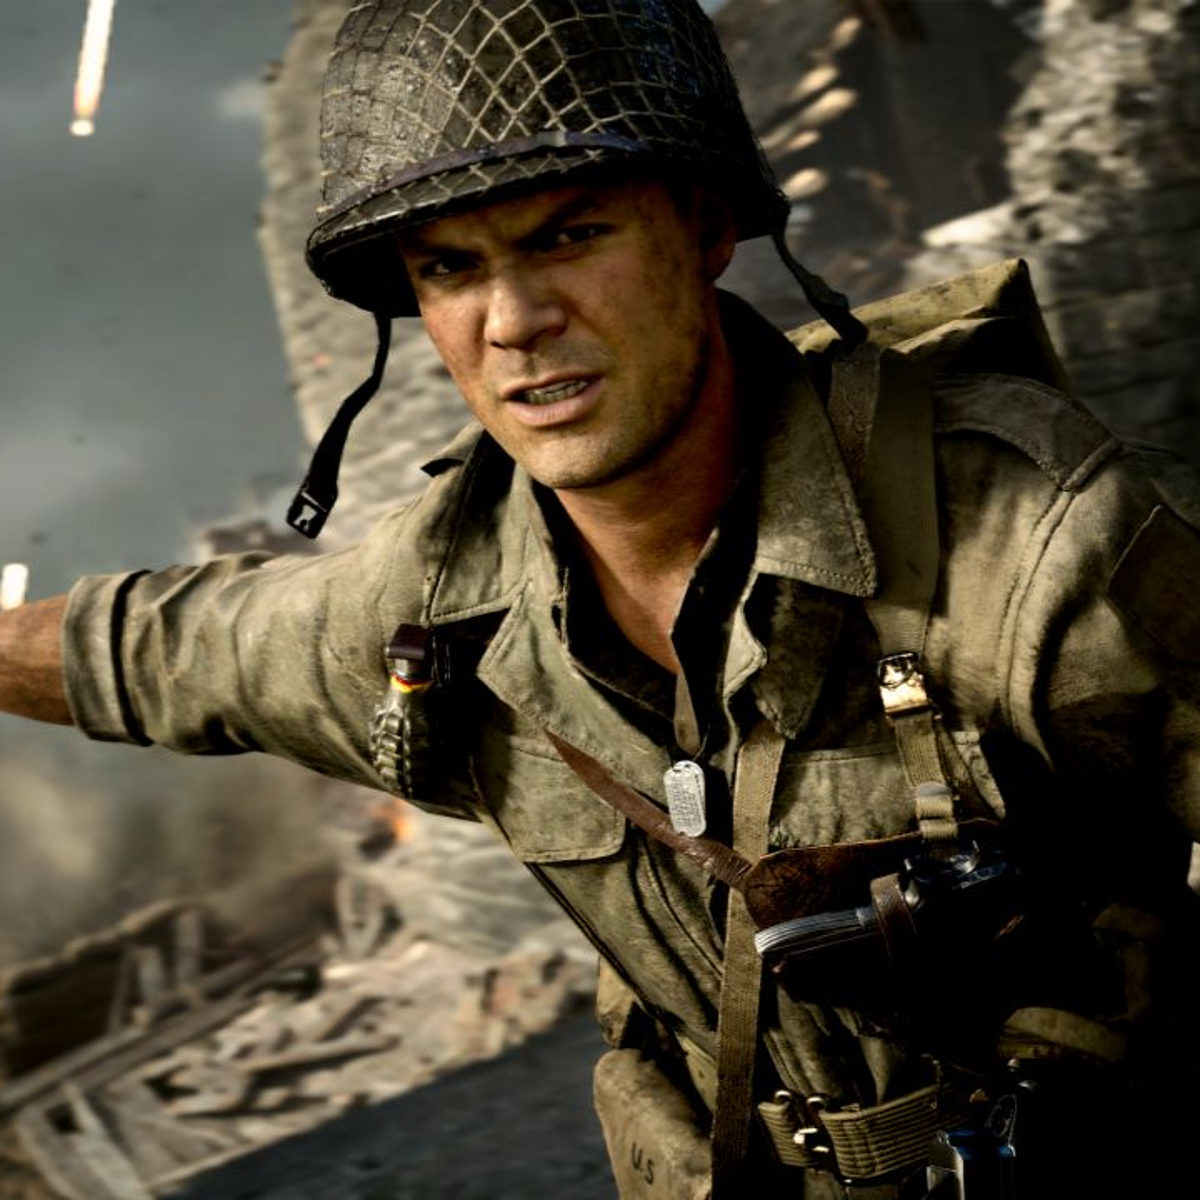 Call of Duty WW2 server issues: dedicated servers in testing, PC